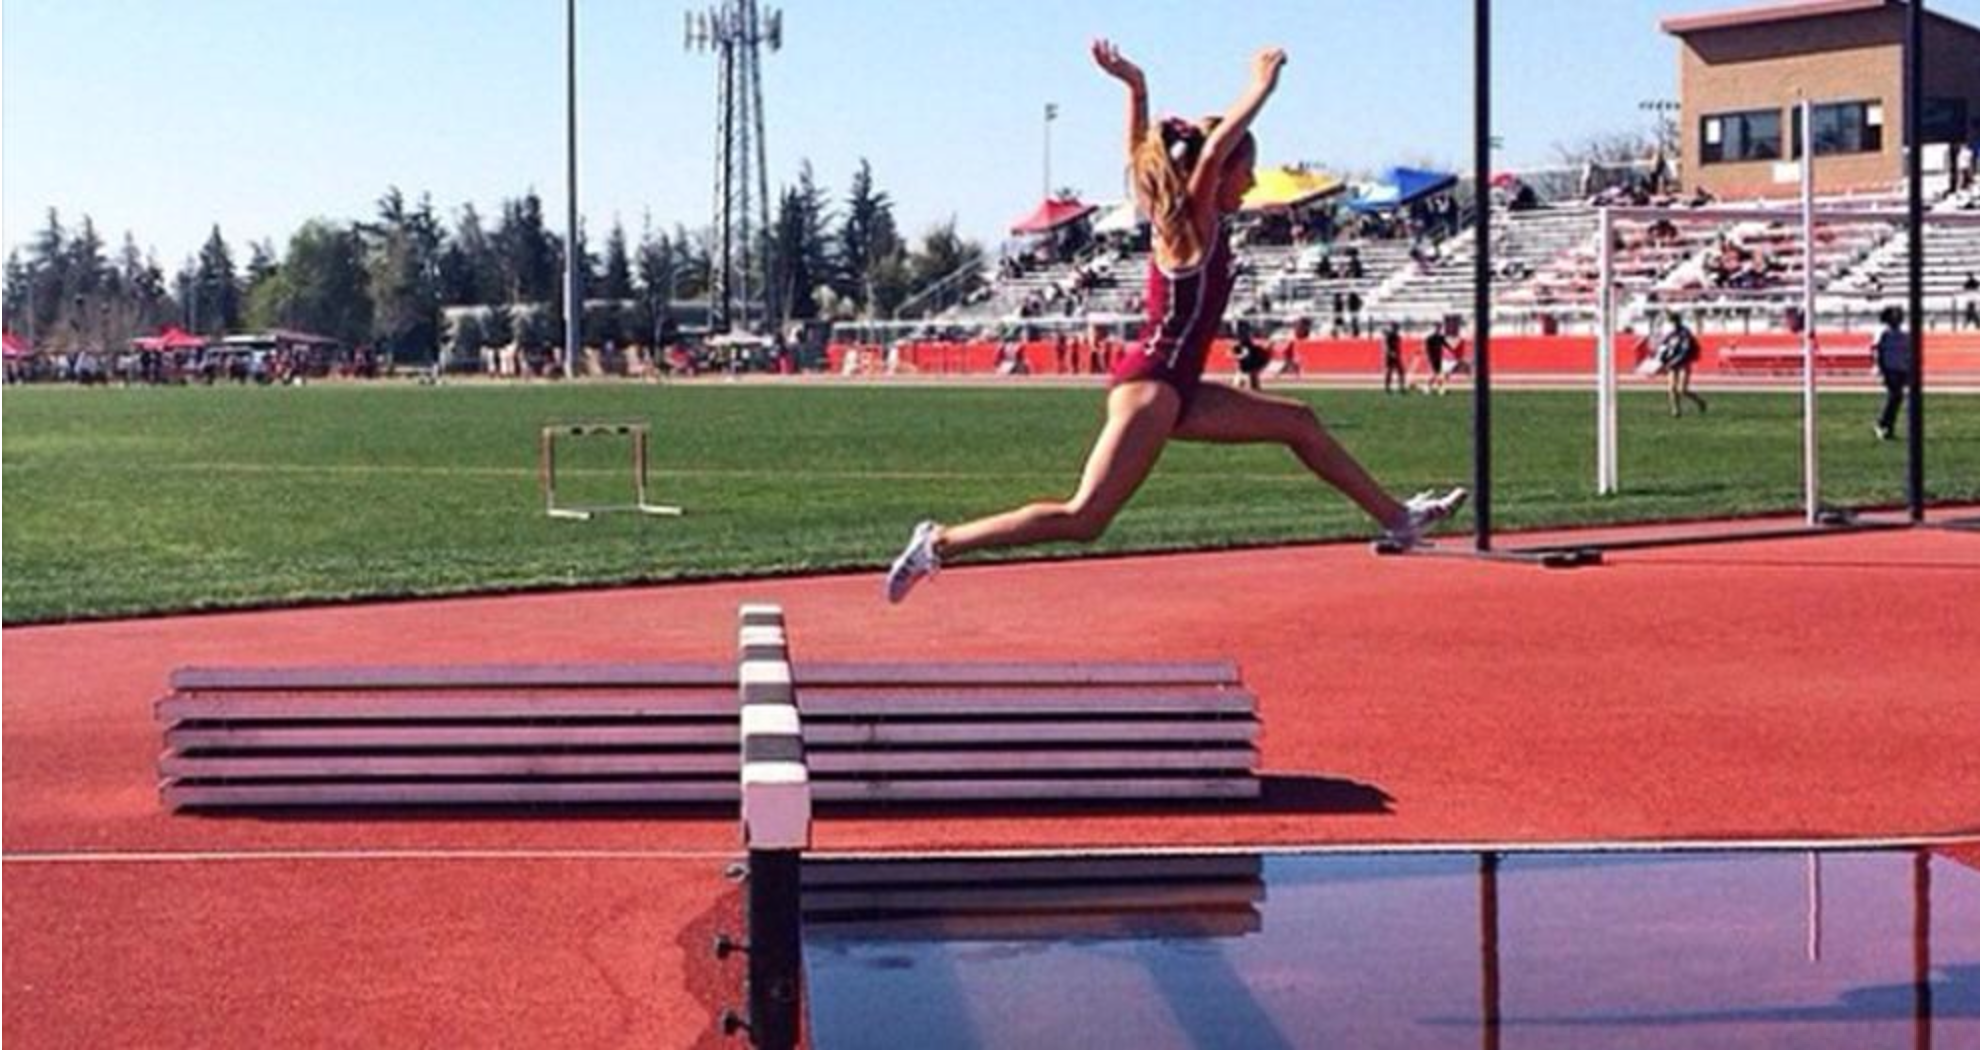 Grayson Murphy broke her own school record by more than 17 seconds in the Steeplechase.